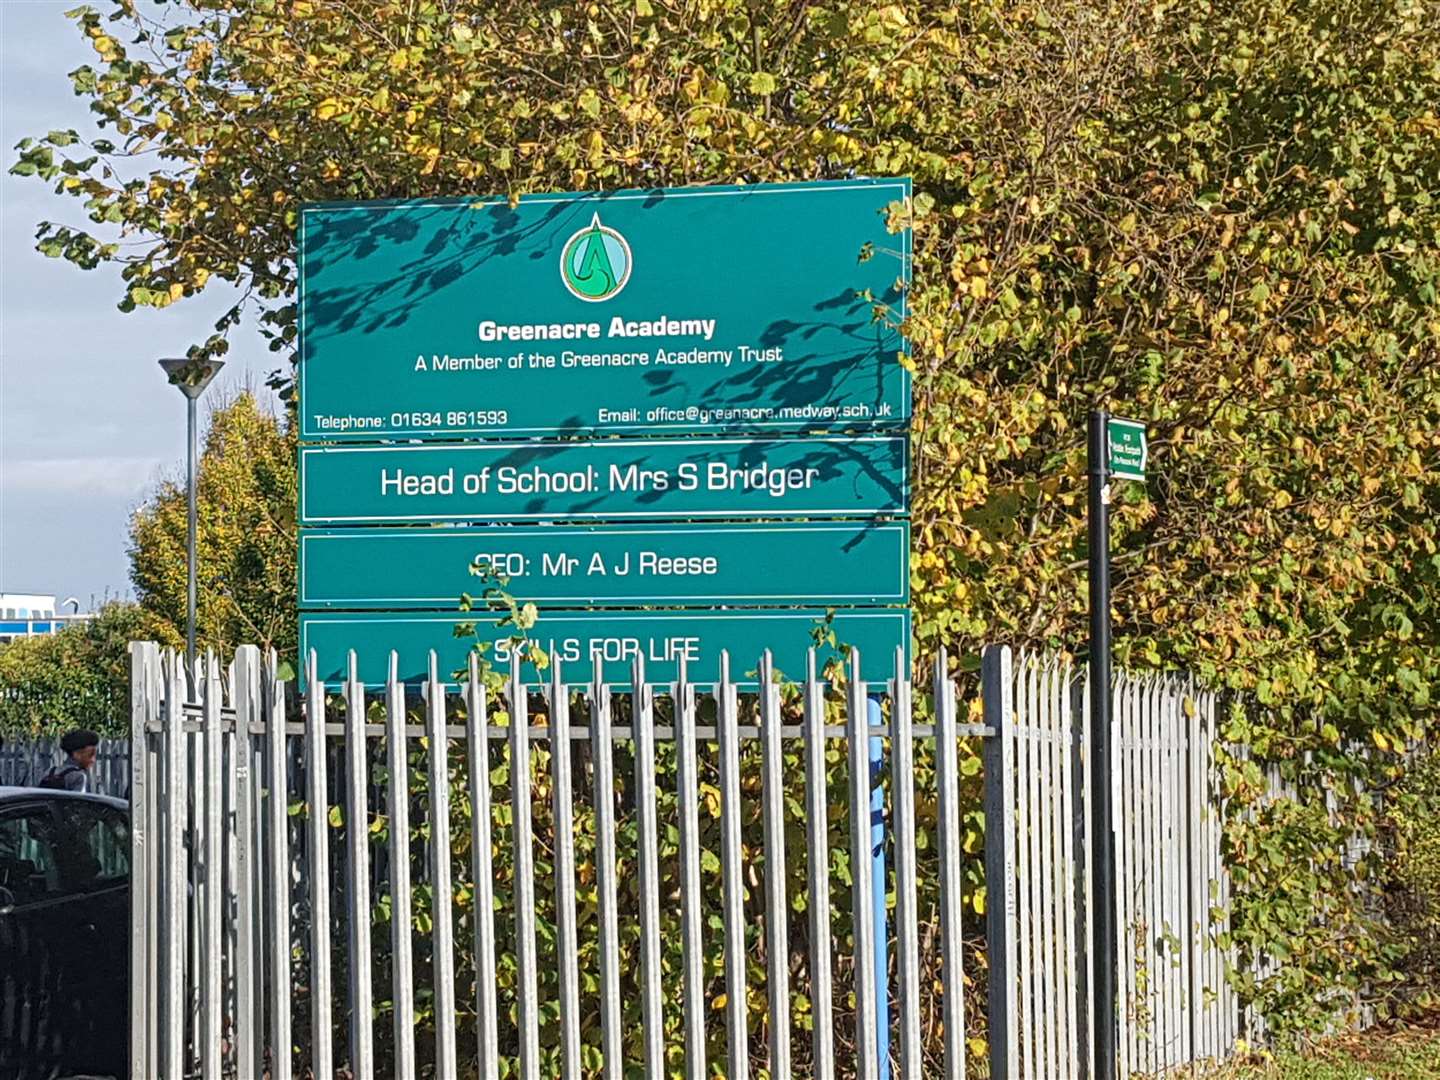 Greenacre Academy has had to close to sixth formers